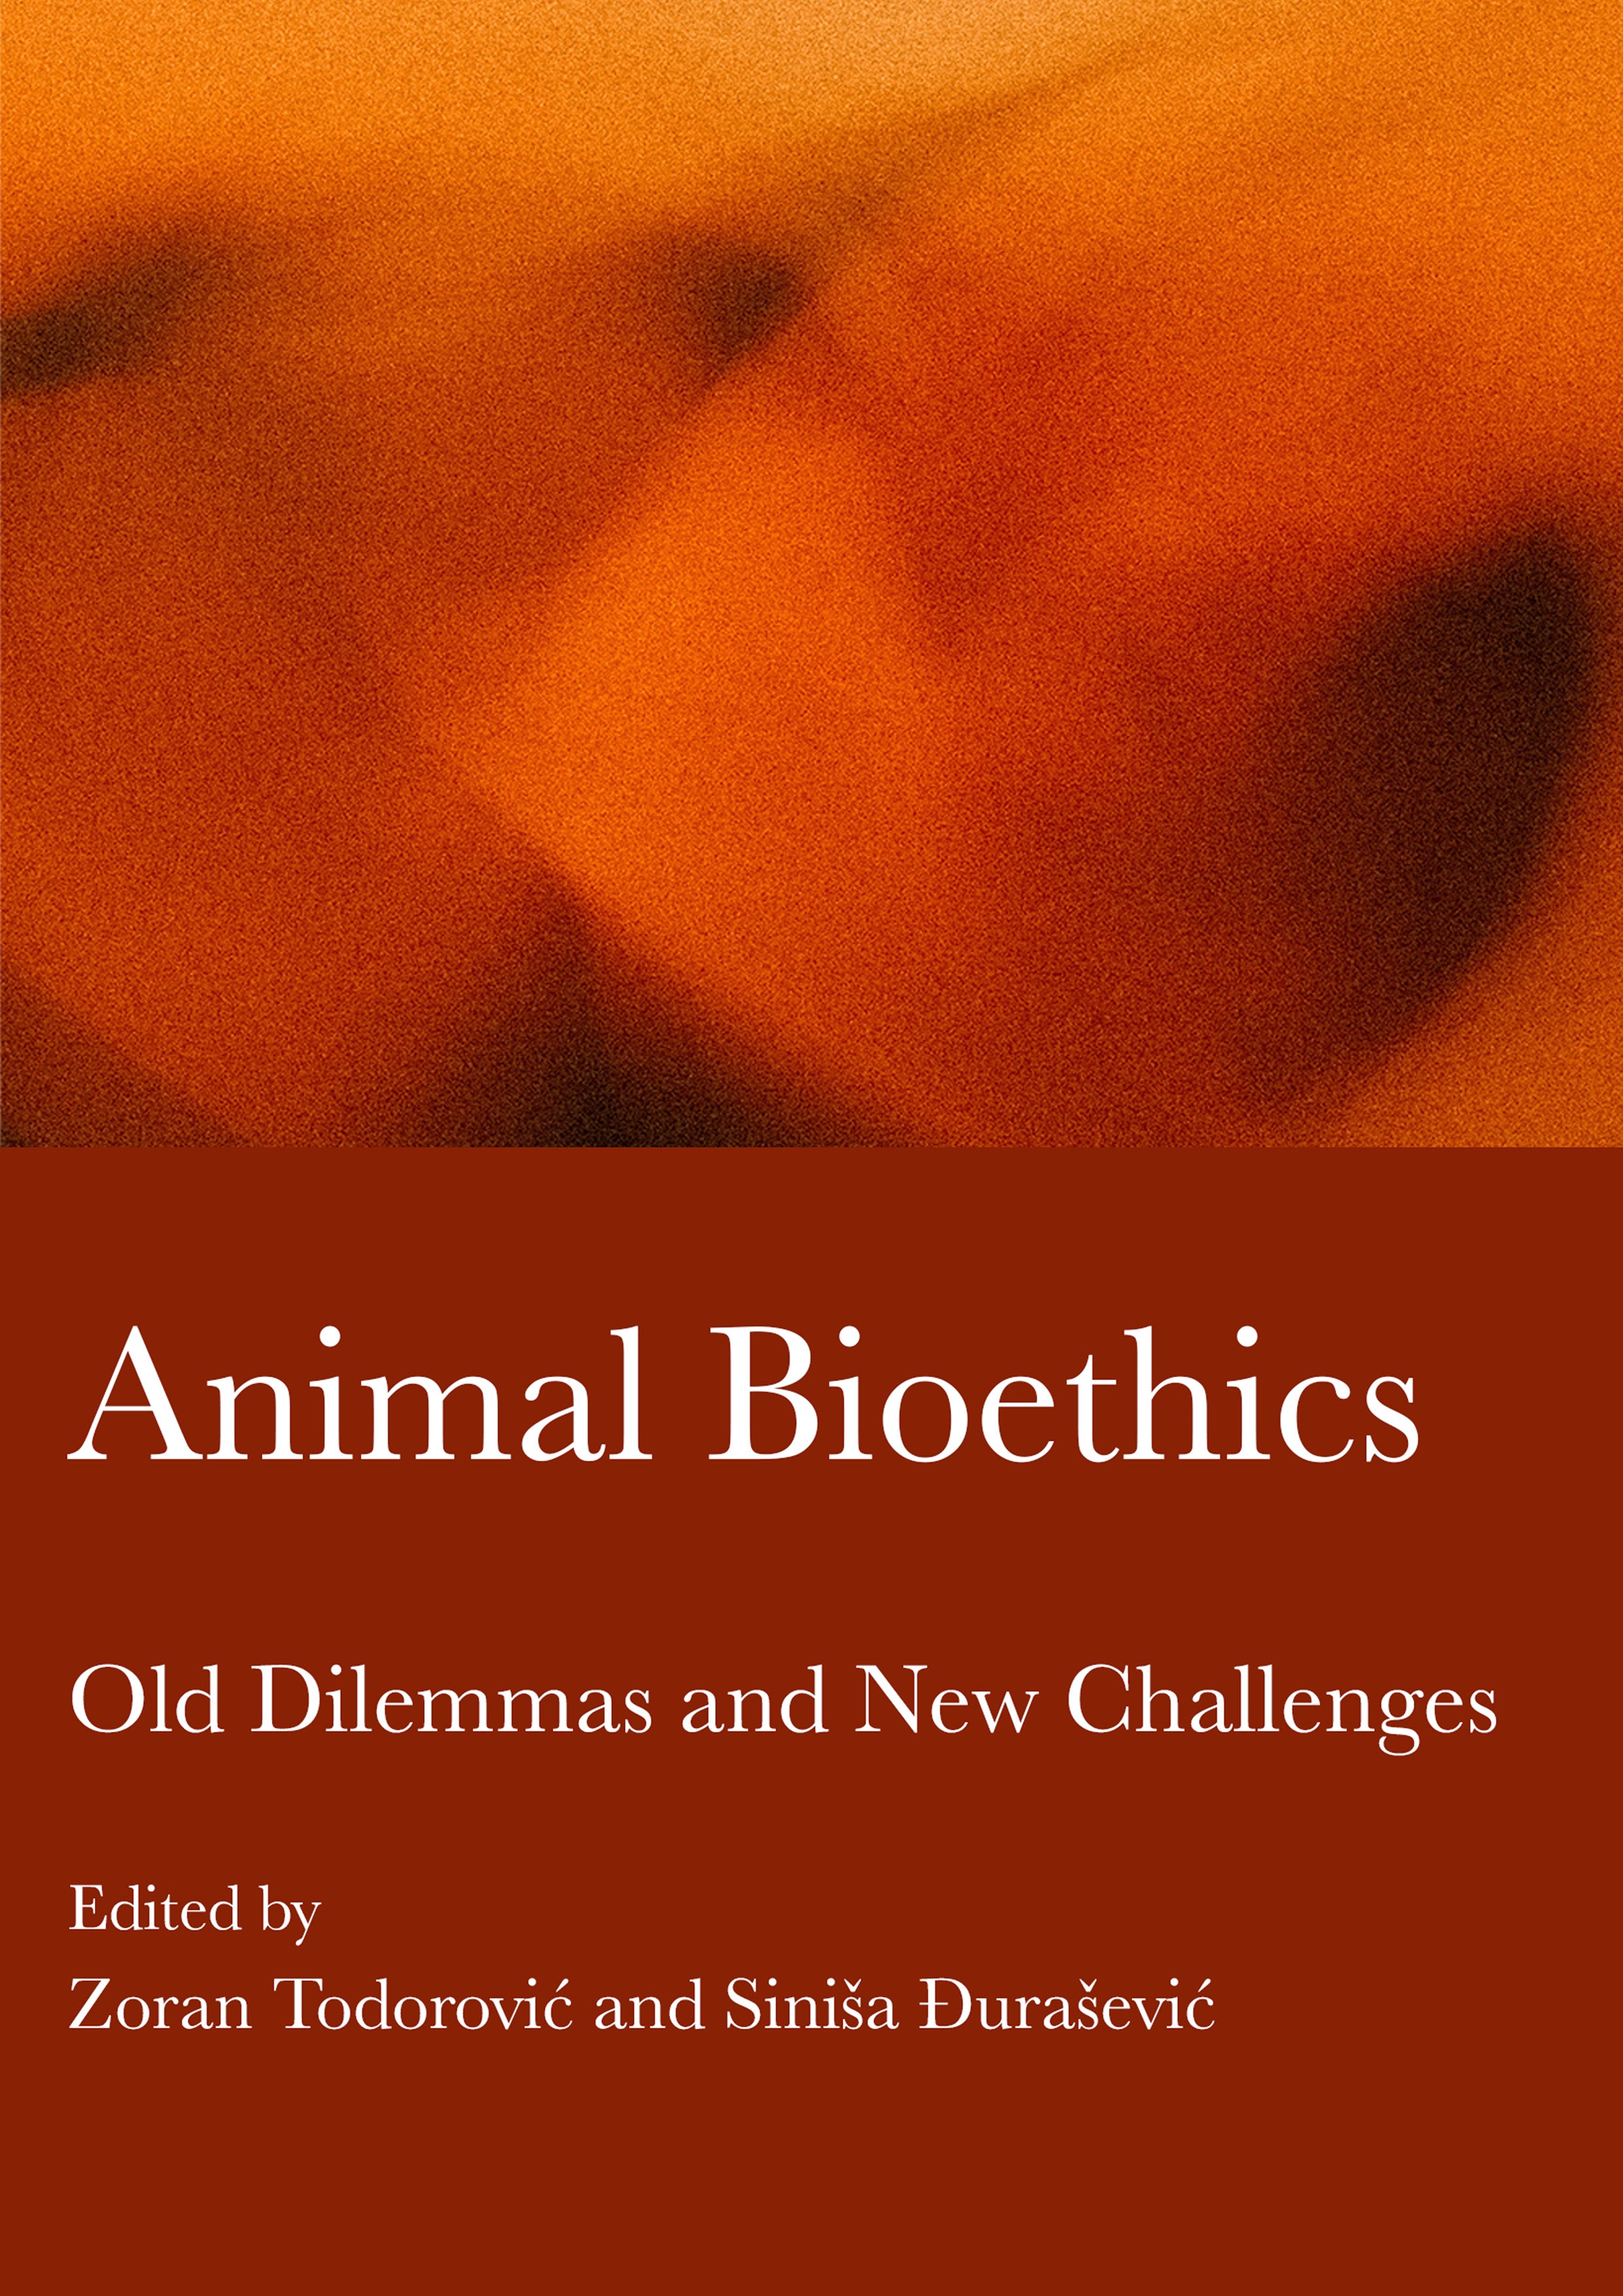 Ethics　New　Old　Challenges　Dilemmas　–　and　Press　Animal　Bioethics: